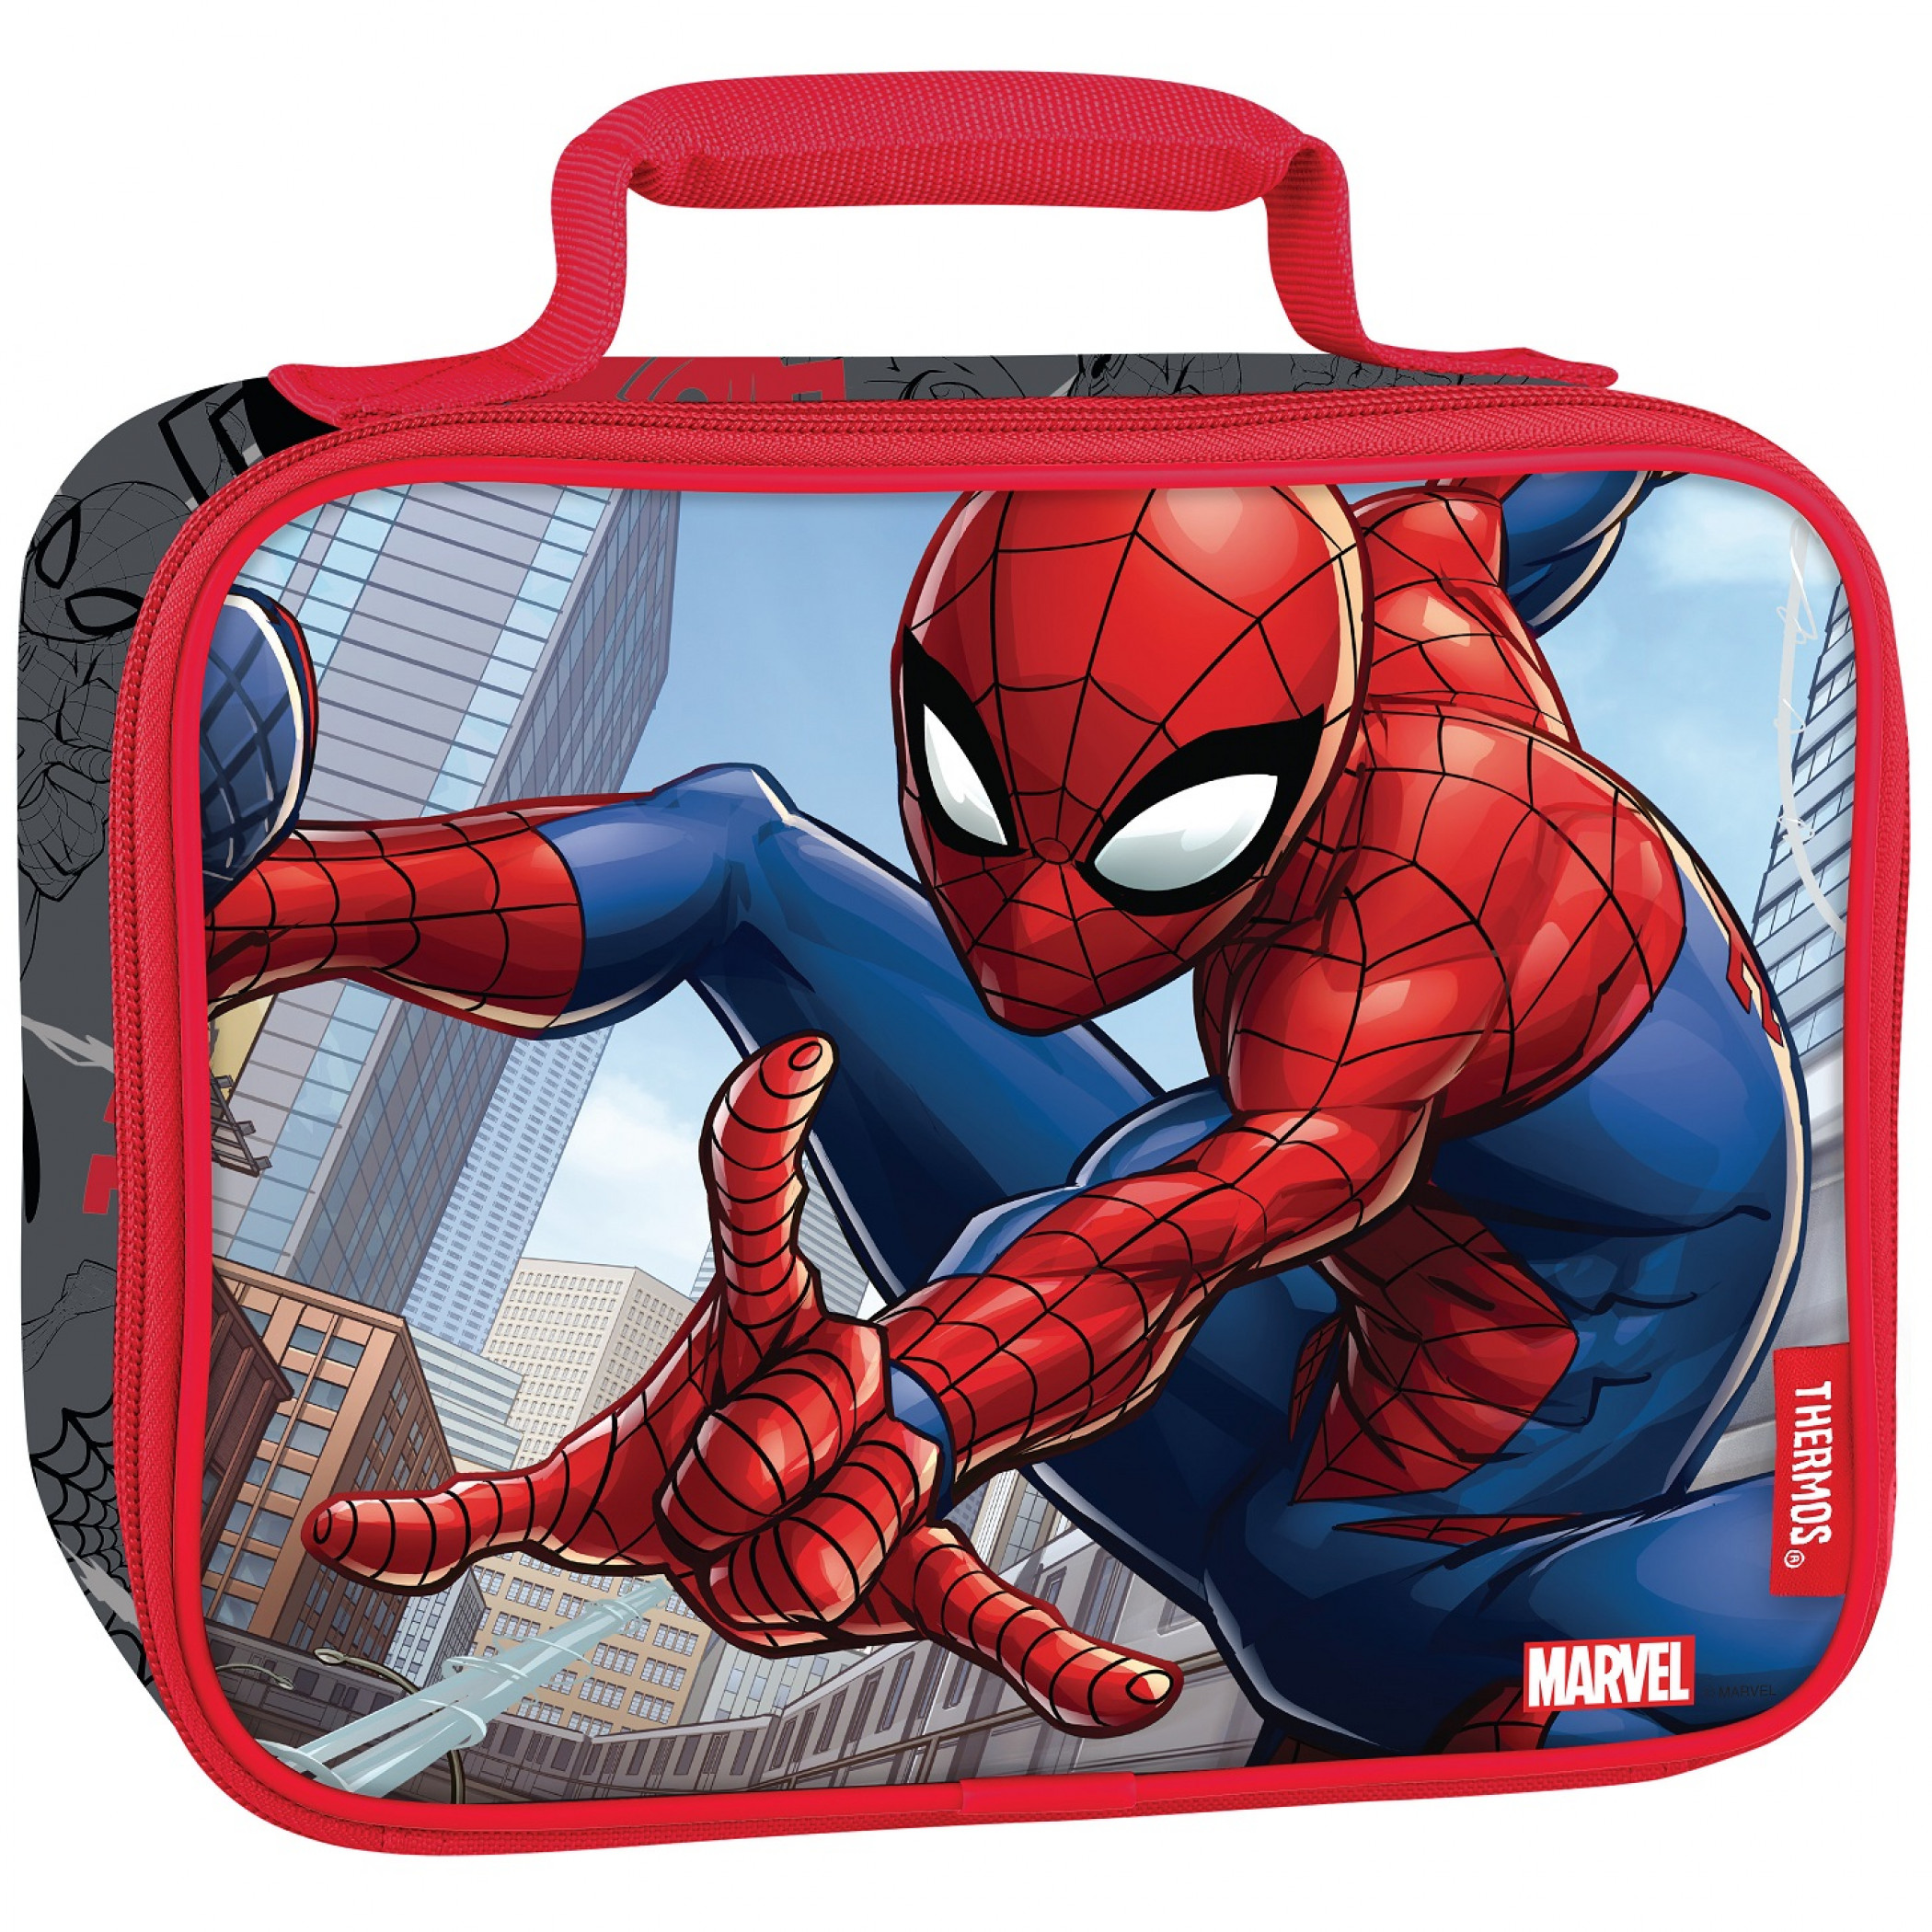 Spider-Man Thermos Insulated Lunch Box